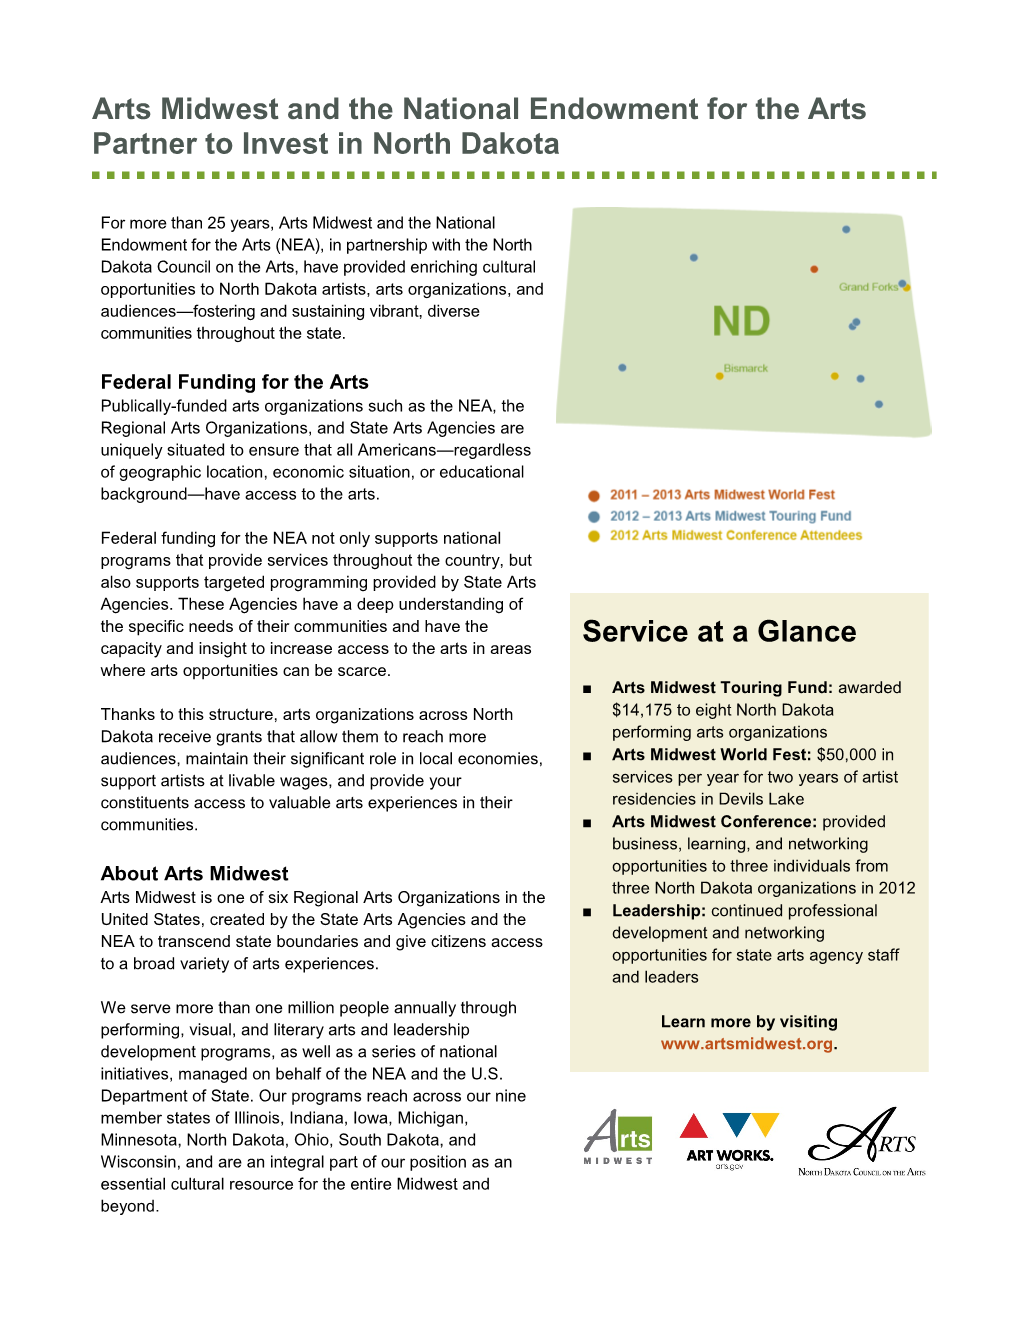 Arts Midwest and the National Endowment for the Arts Partner to Invest in North Dakota Service at a Glance